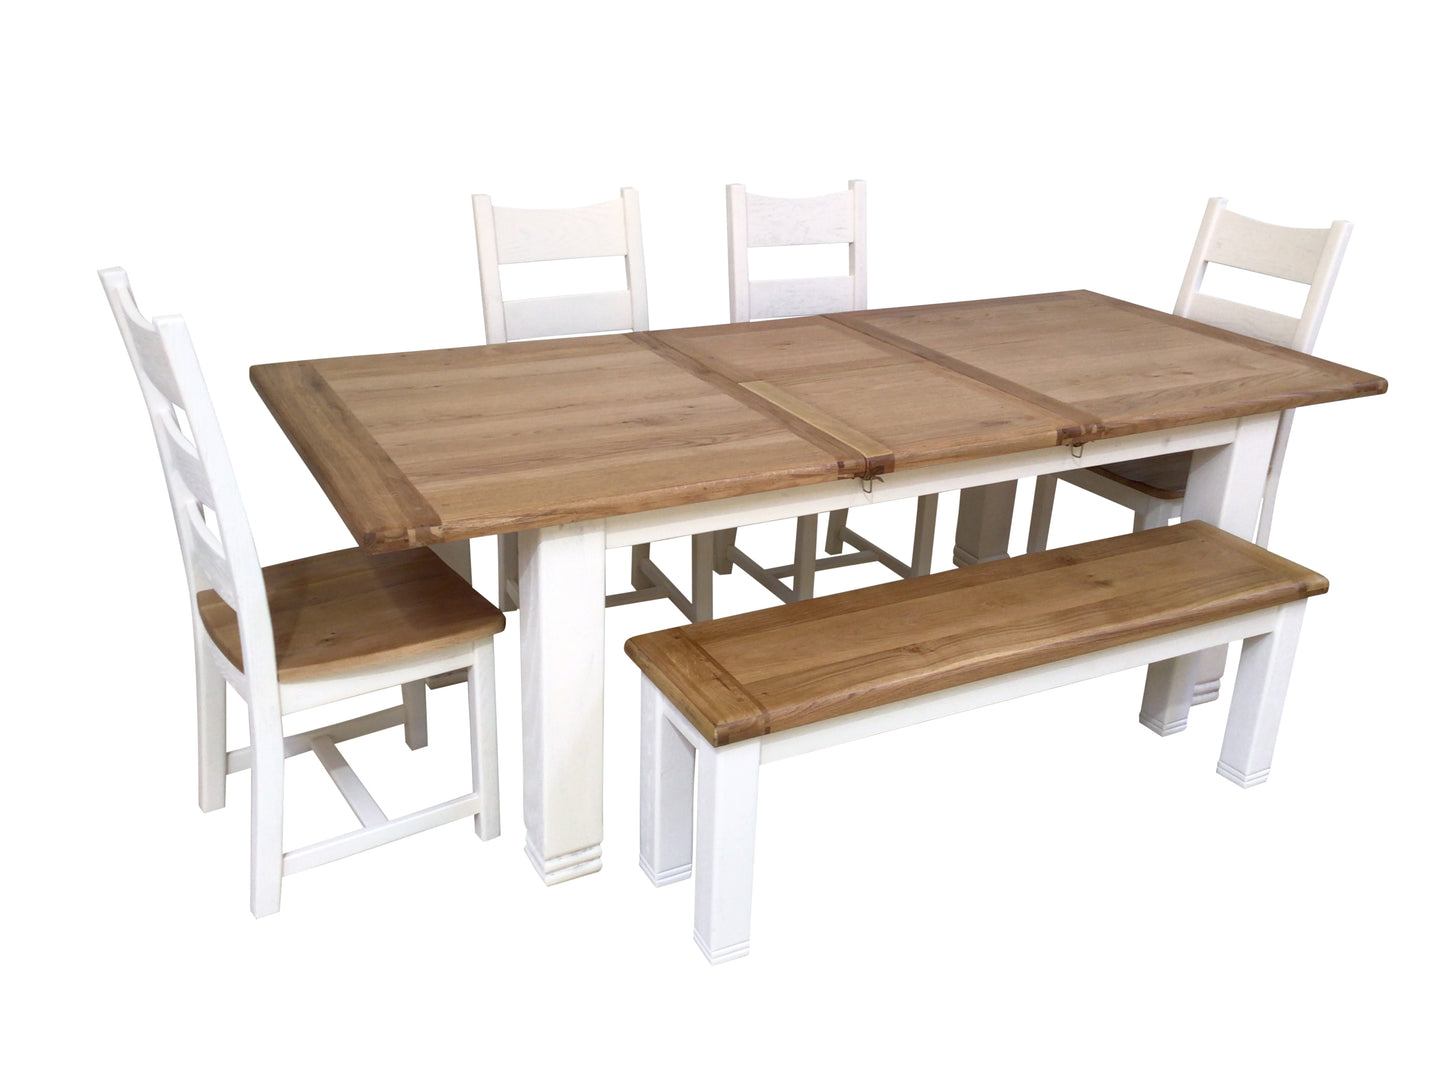 Danube 1.8m Ext Dining Set painted Off-White